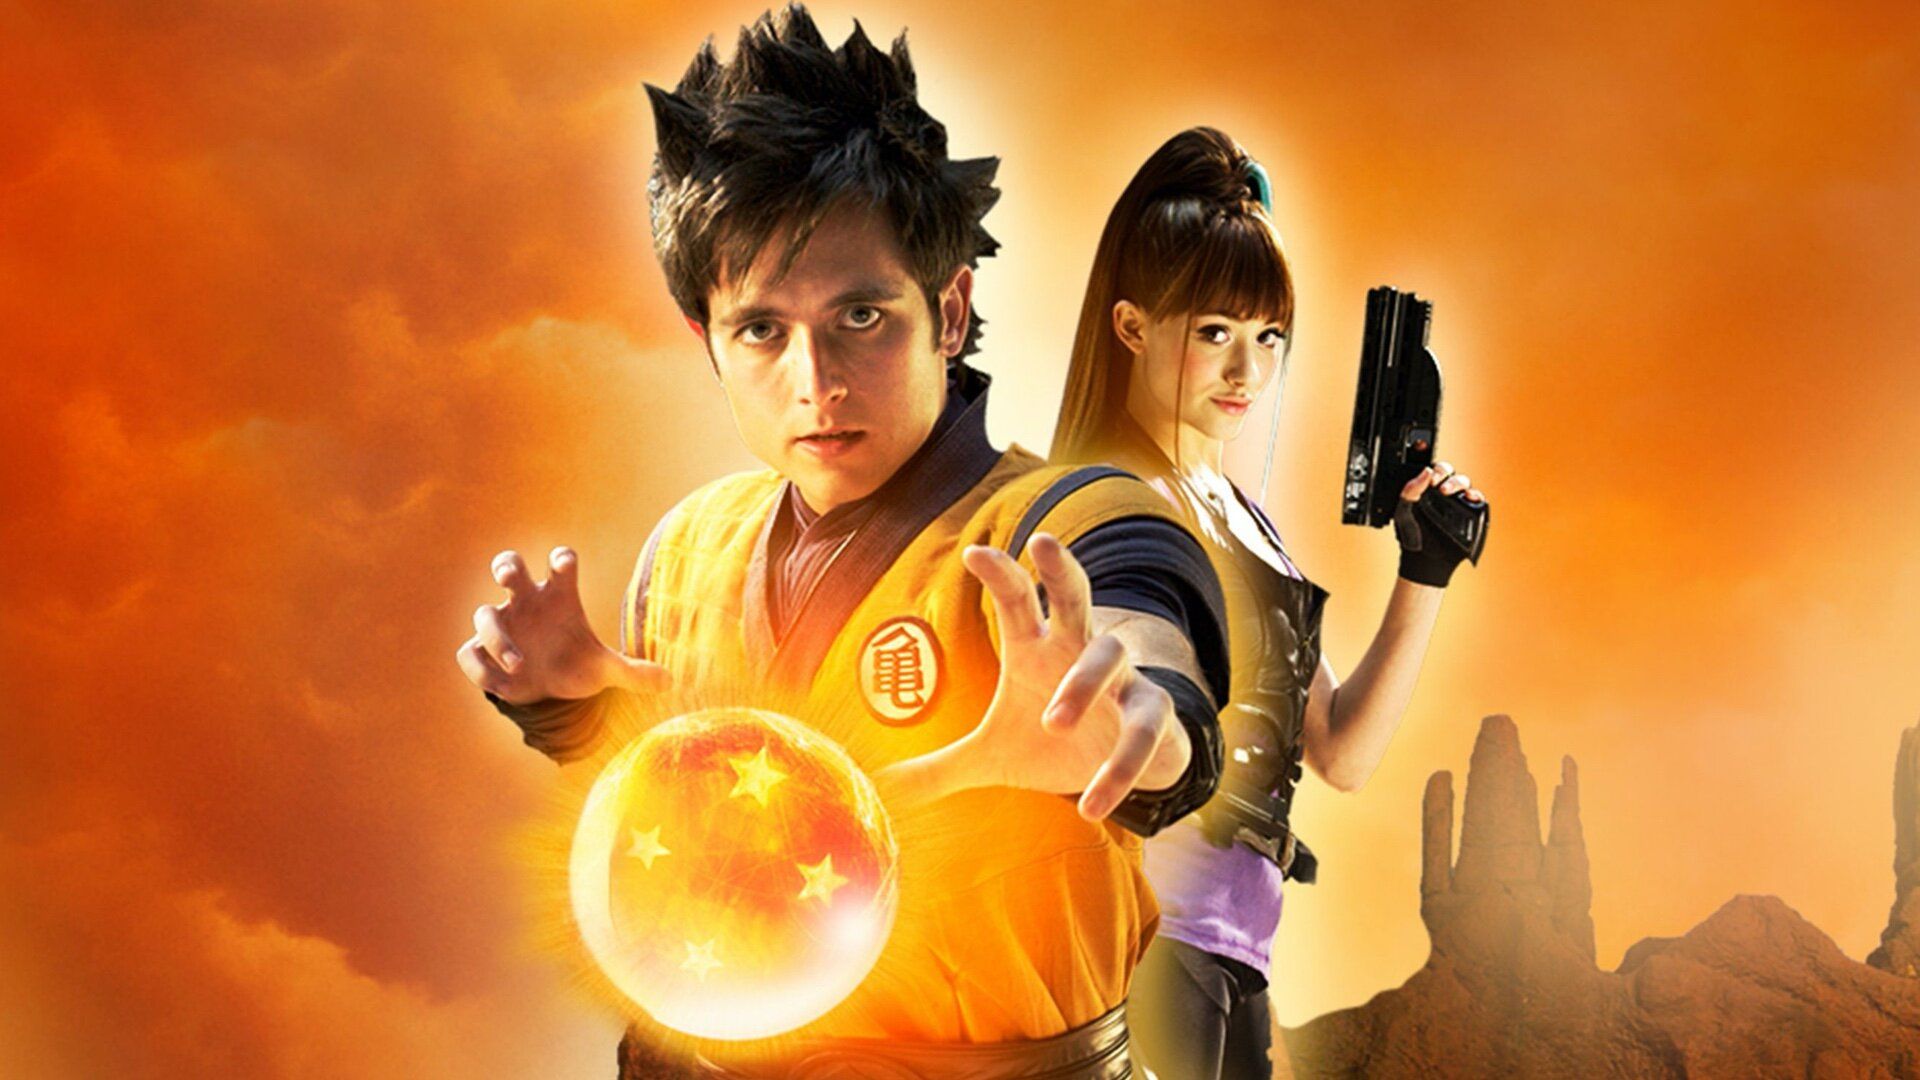 Enjoy This Pitch Meeting For The Terrible Film DRAGONBALL: EVOLUTION